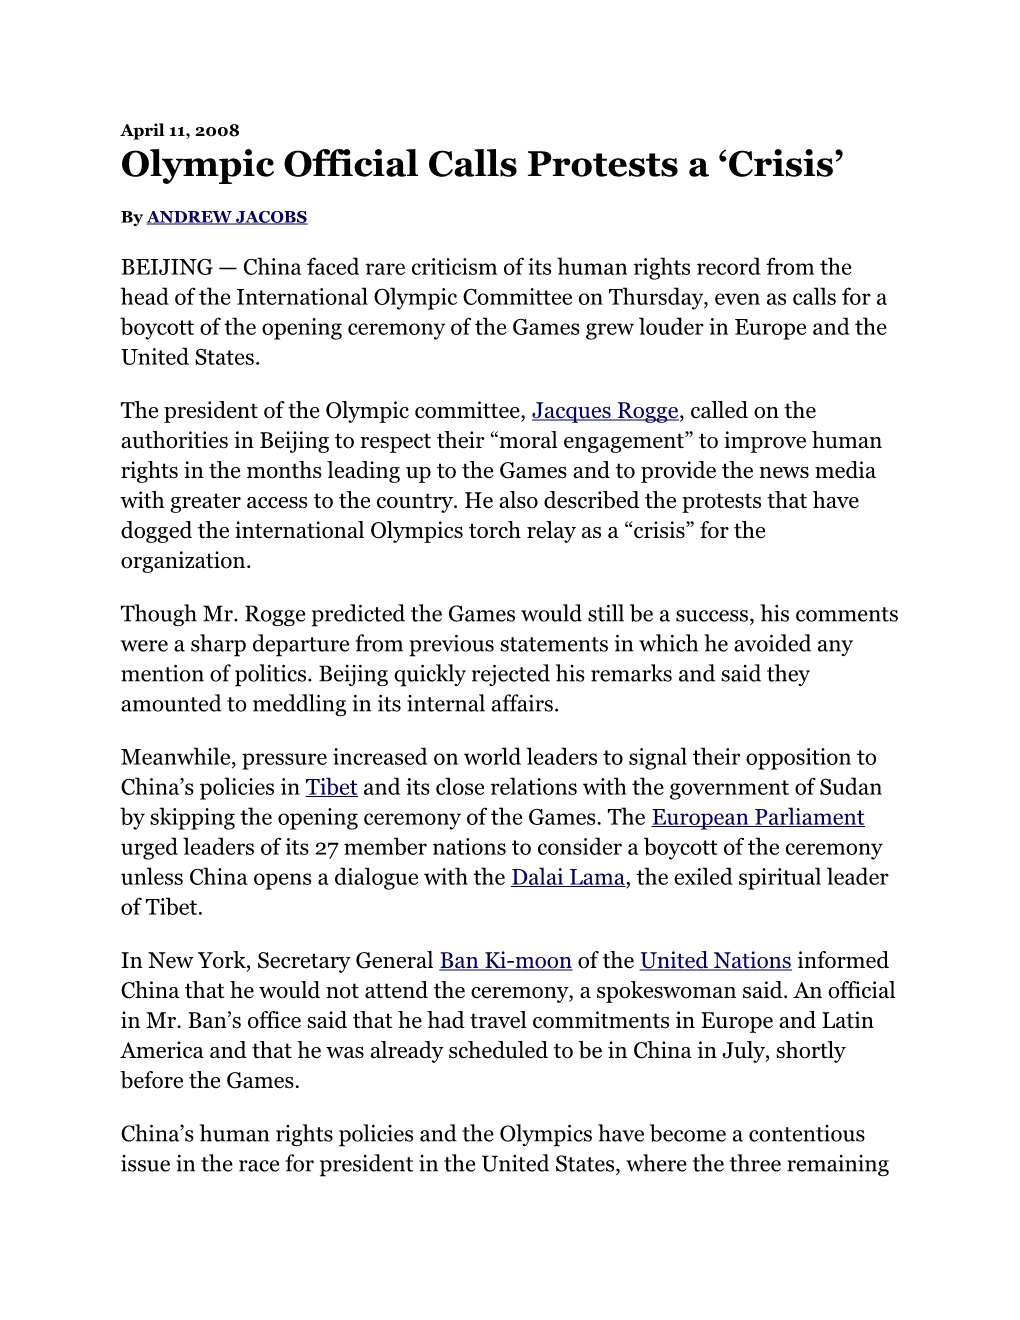 Olympic Official Calls Protests a Crisis